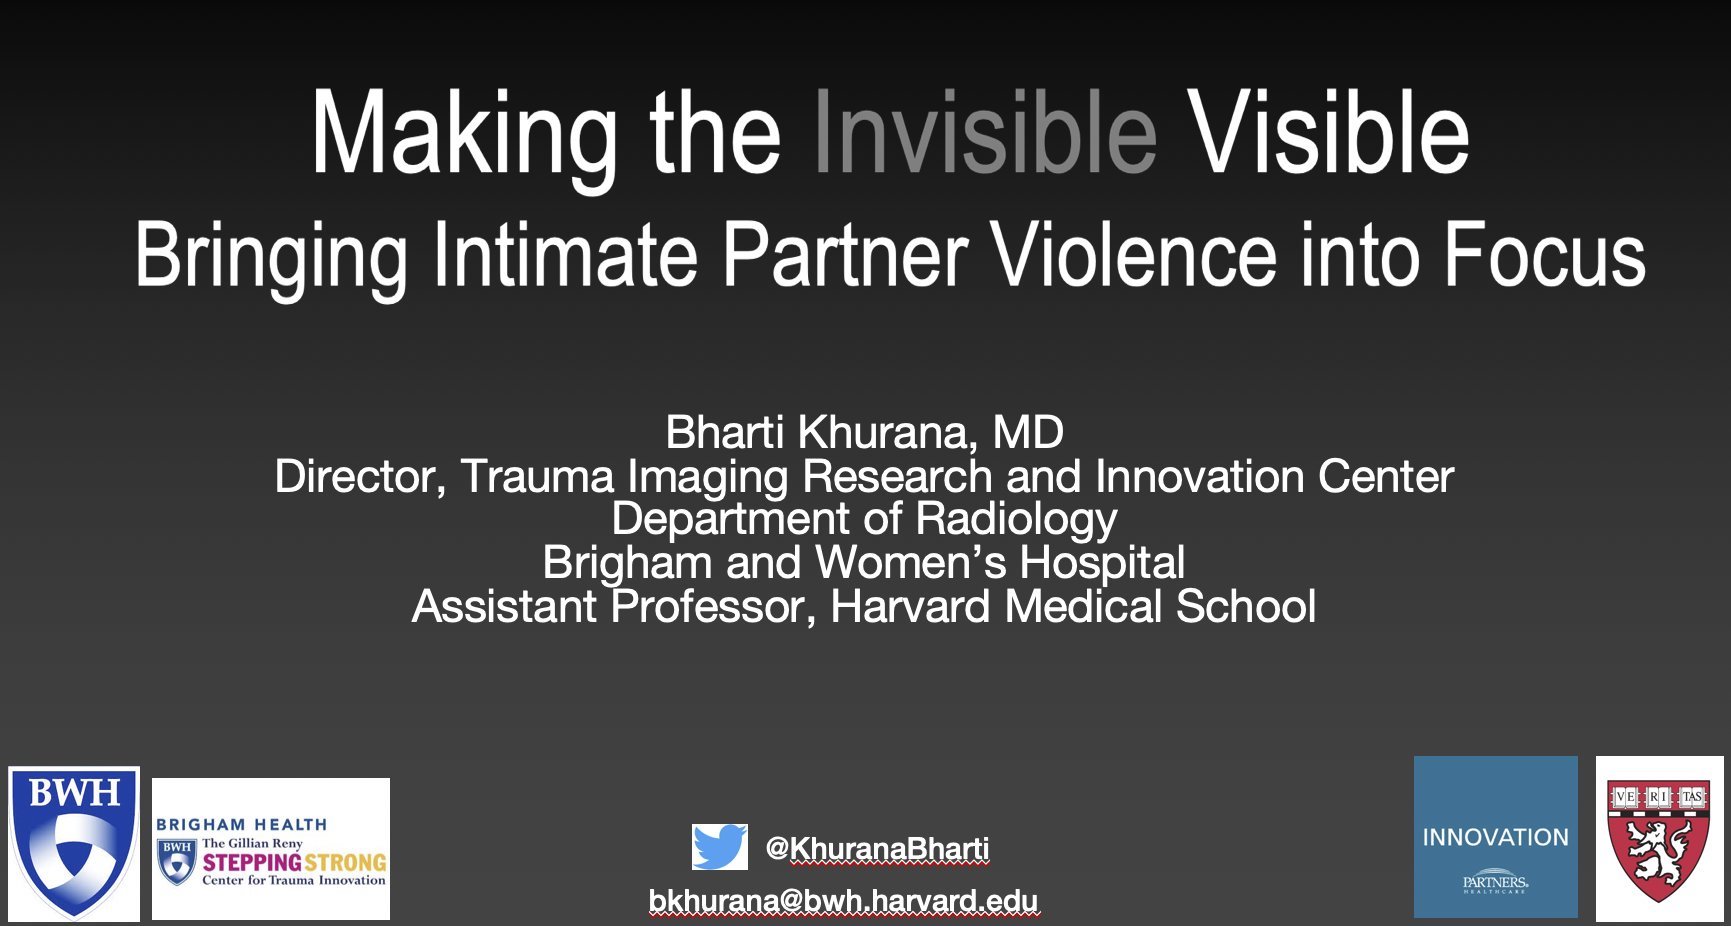 GRAND ROUNDS: Making The Invisible Visible: REFRESHER COURSE: MAKING THE INVISIBLE VISIBLE: BRINGING INTIMATE PARTNER VIOLENCE INTO FOCUS